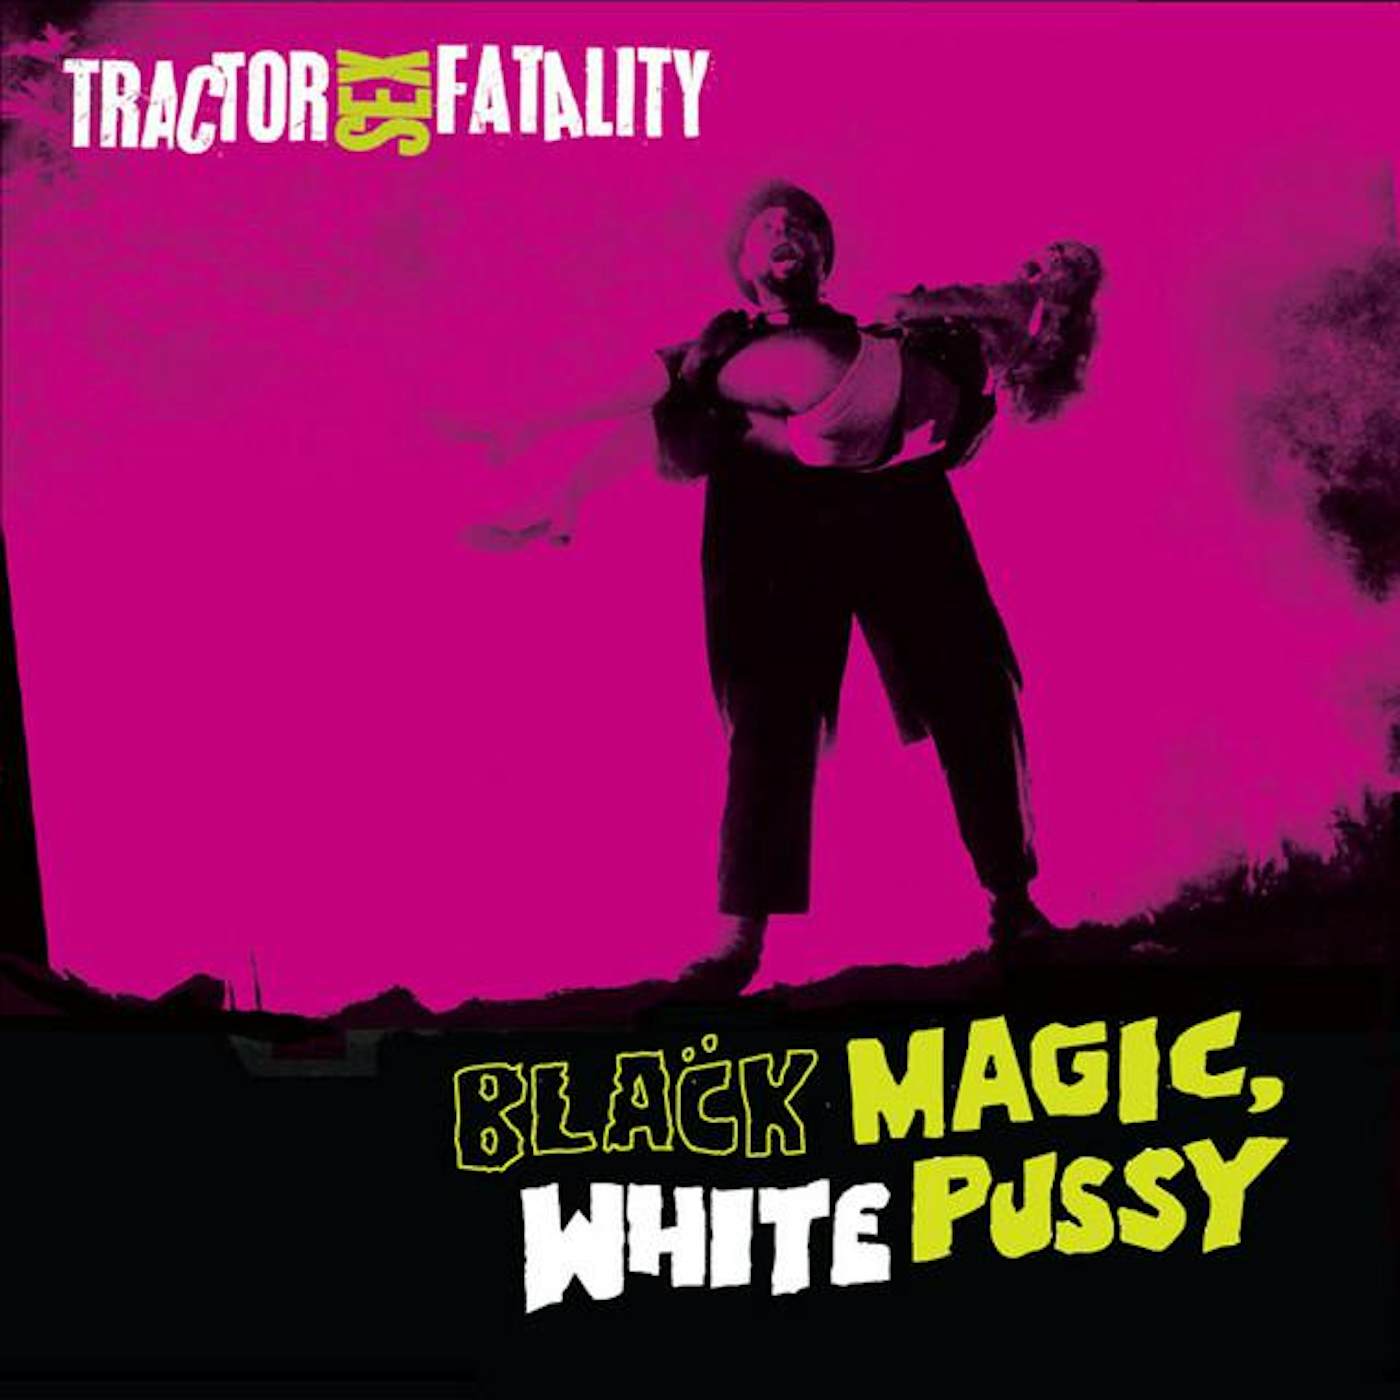 Tractor Sex Fatality